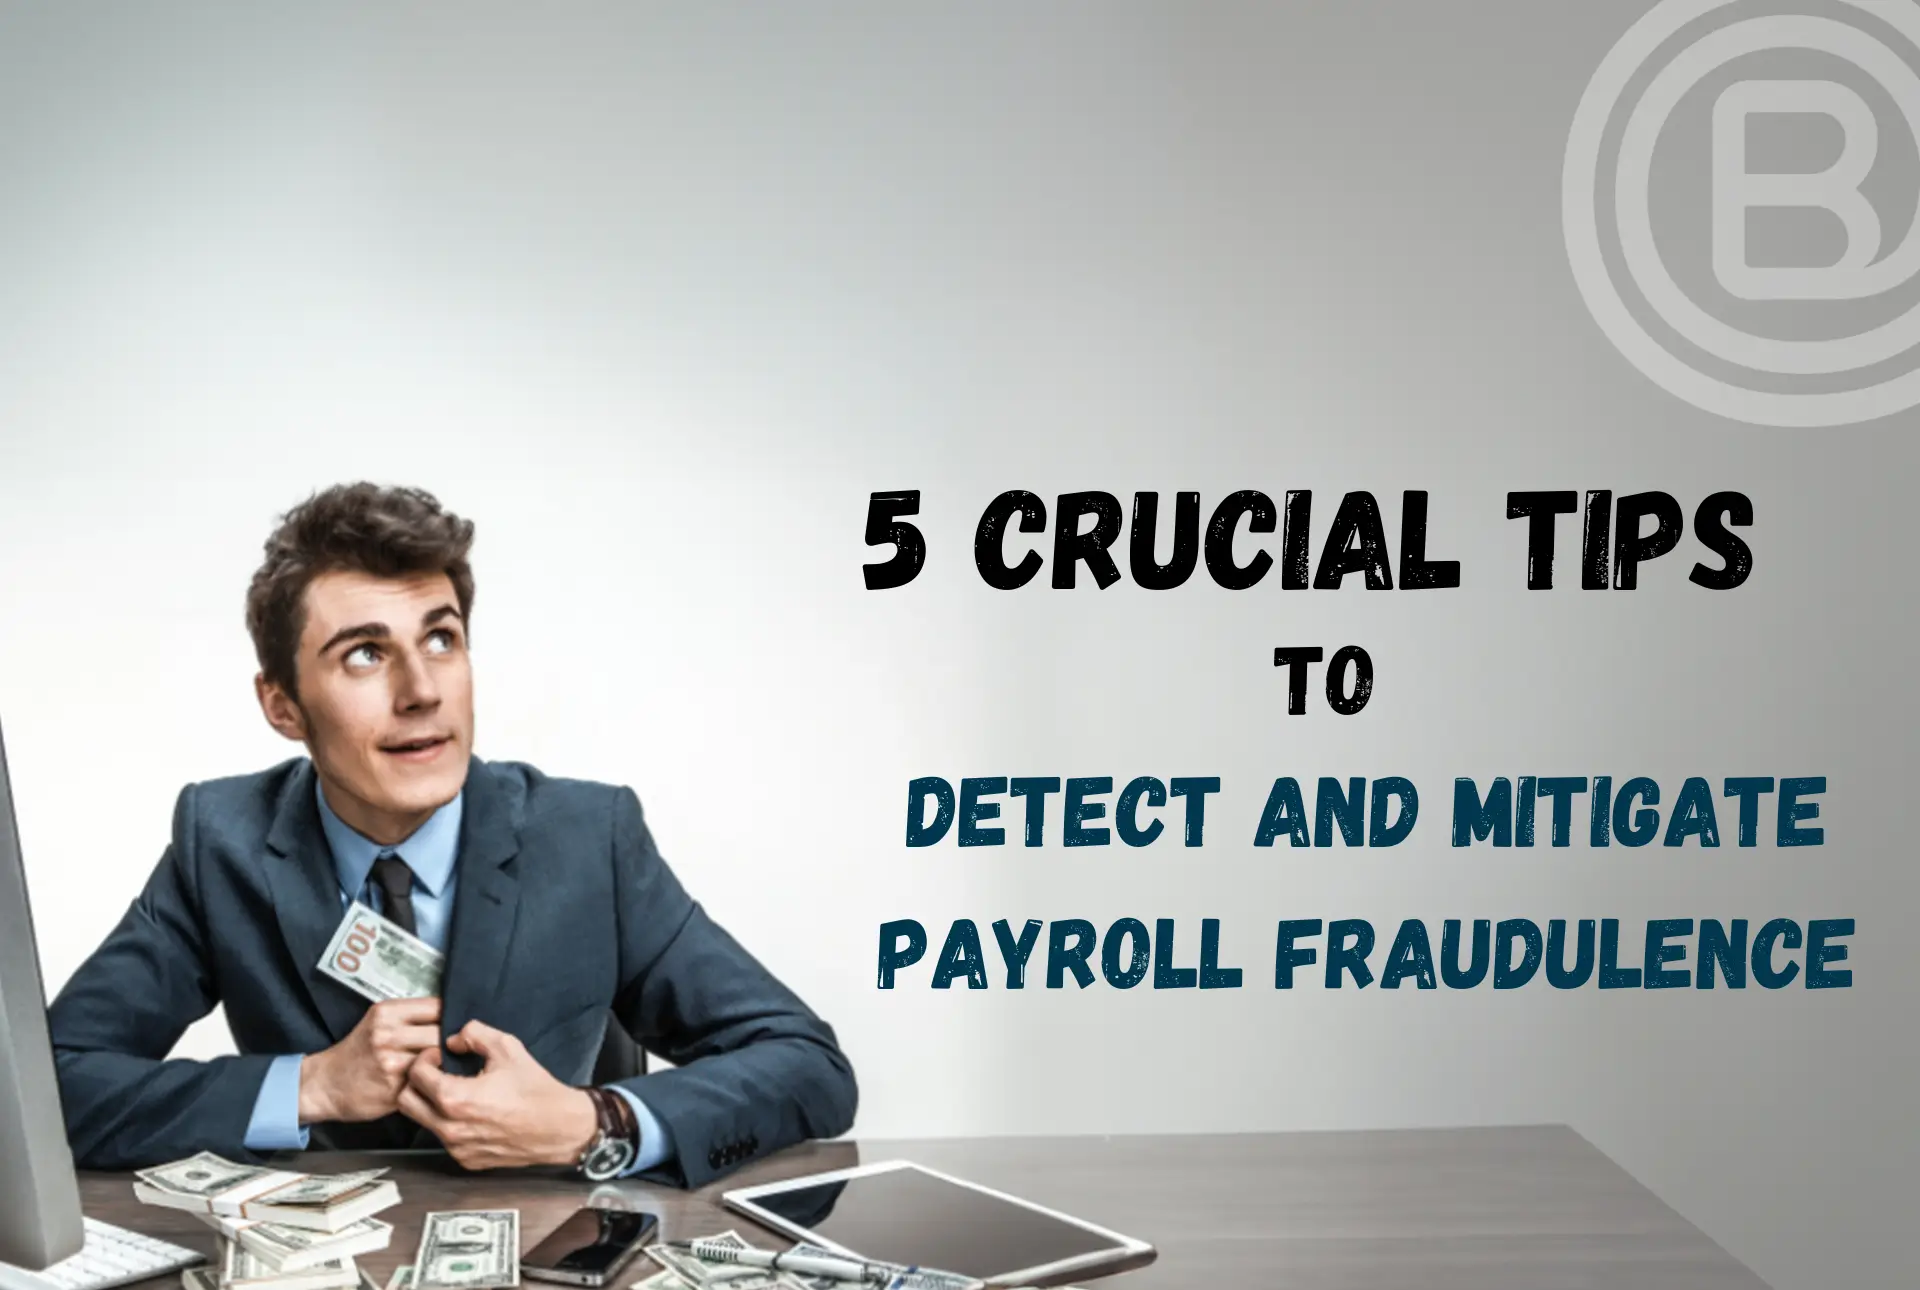 5 Crucial Tips to Detect and Mitigate Payroll Fraudulence